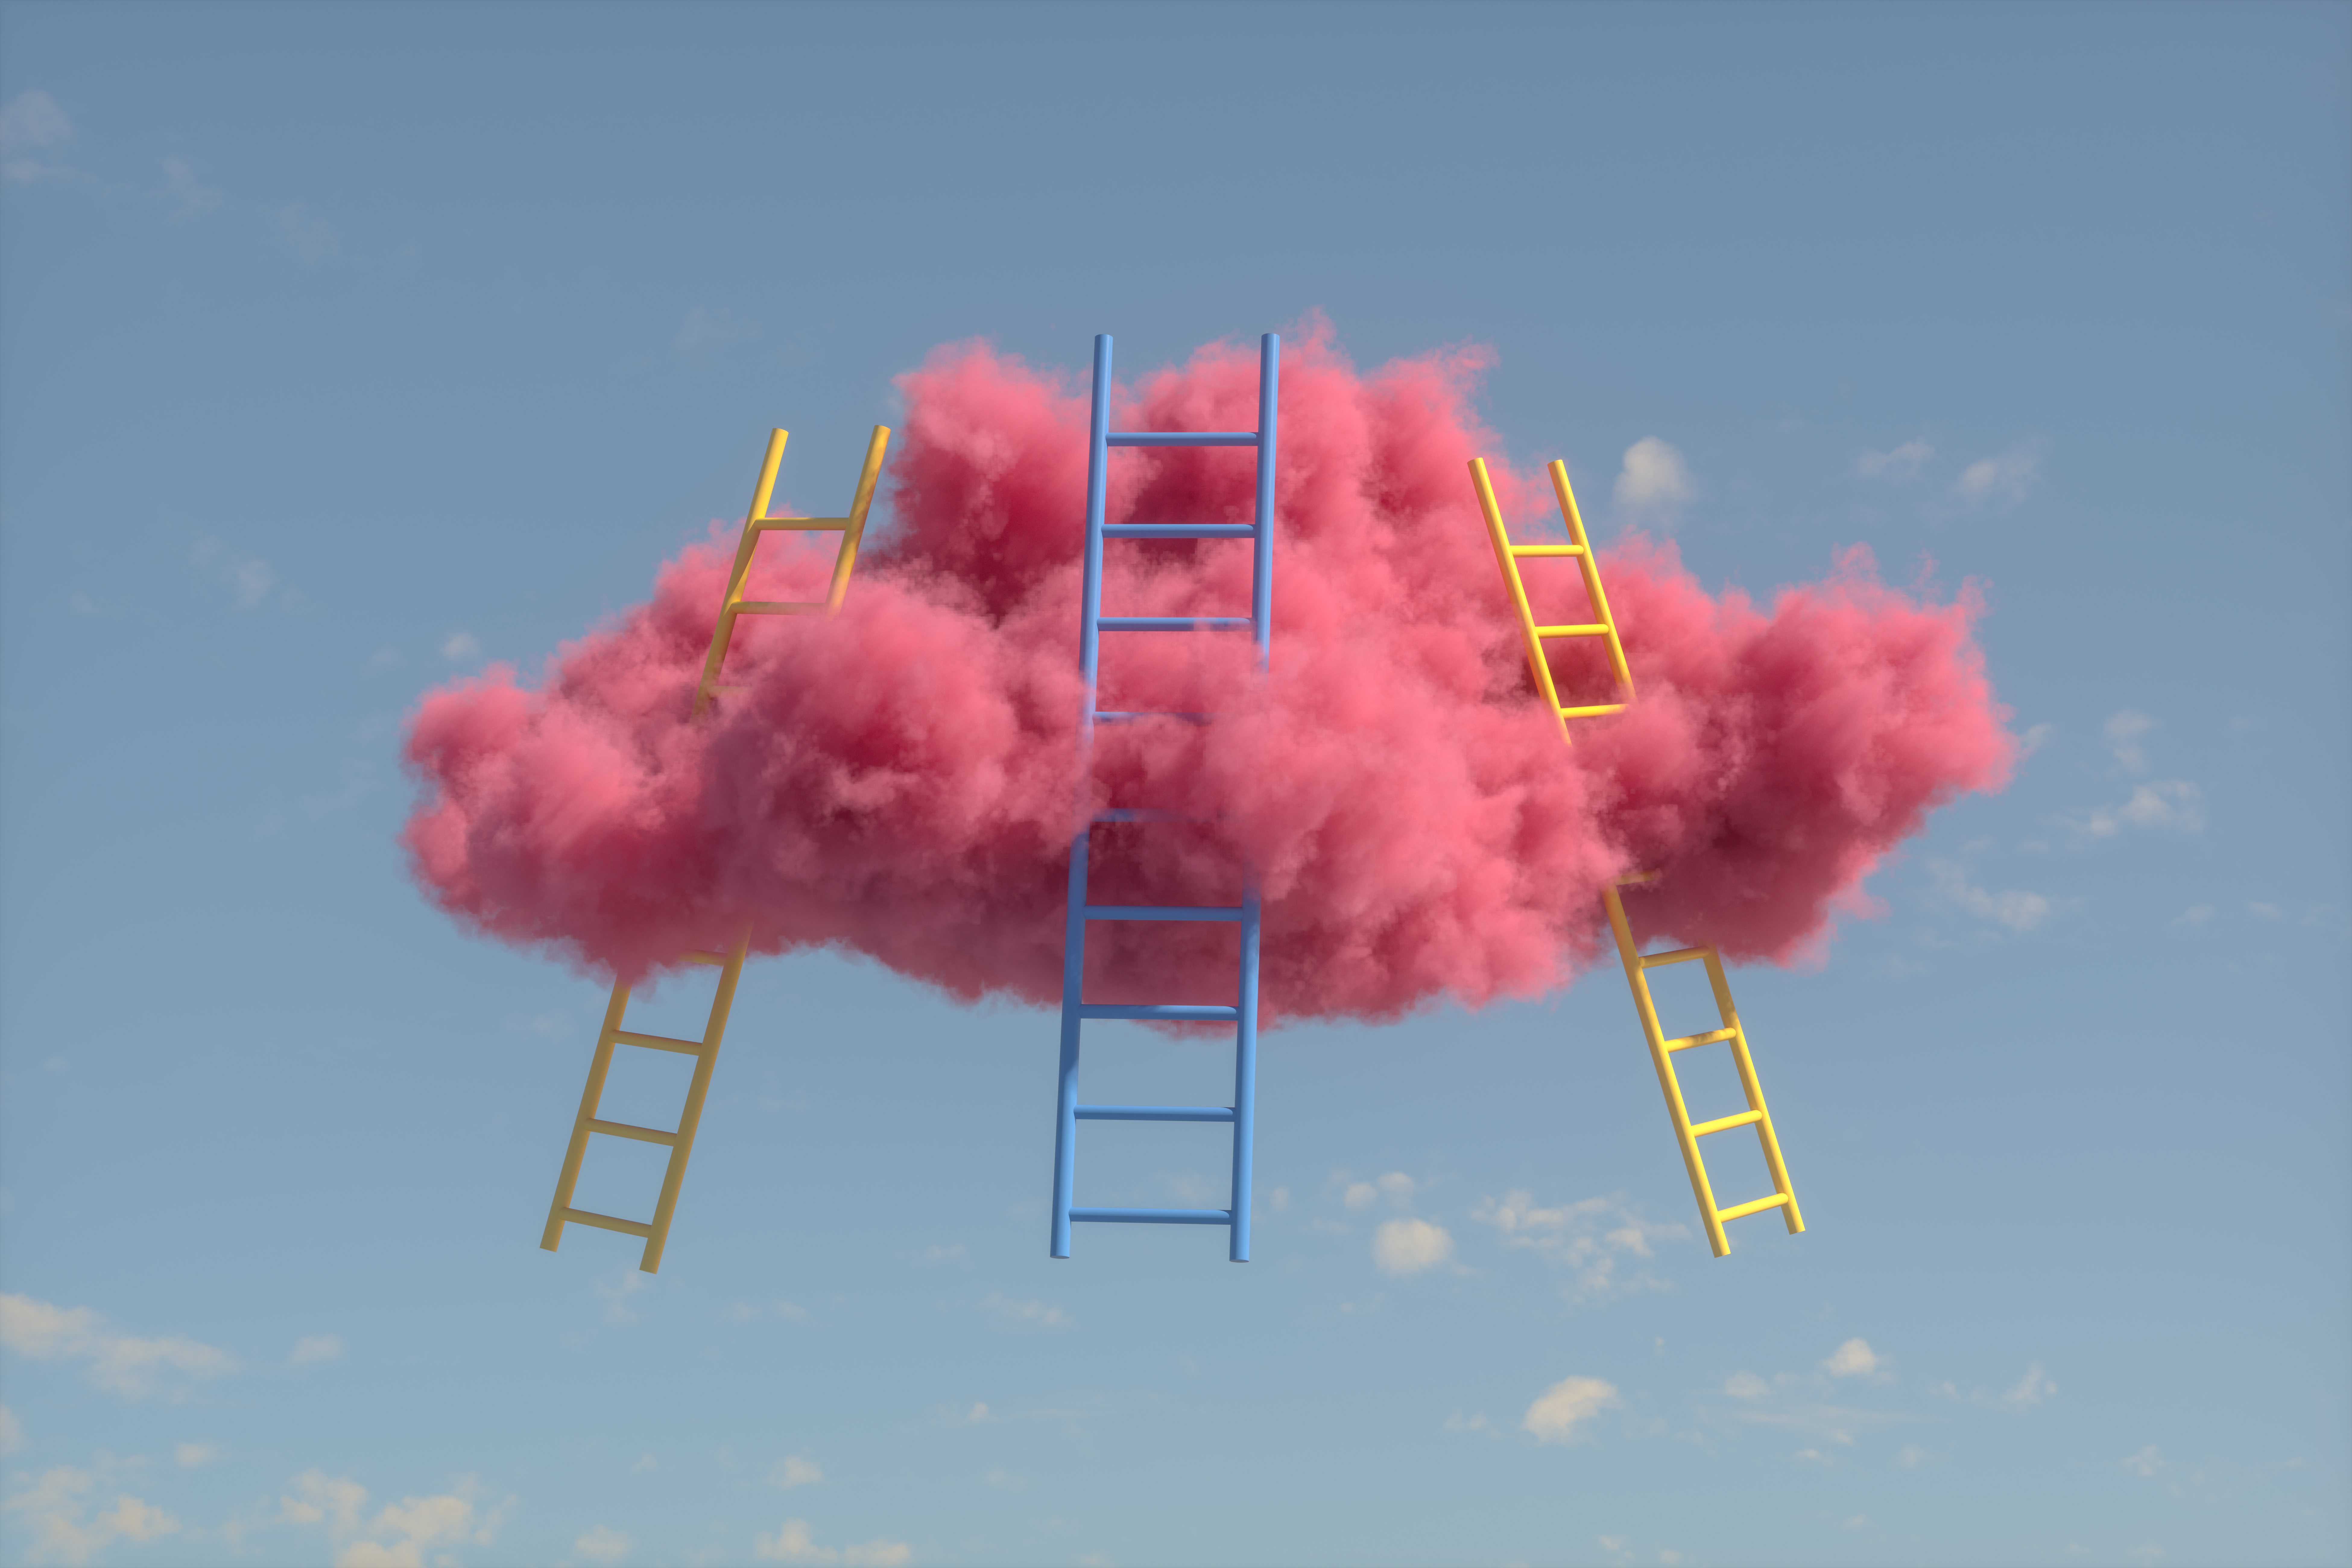 managing up three ladders leading up into a pink cloud